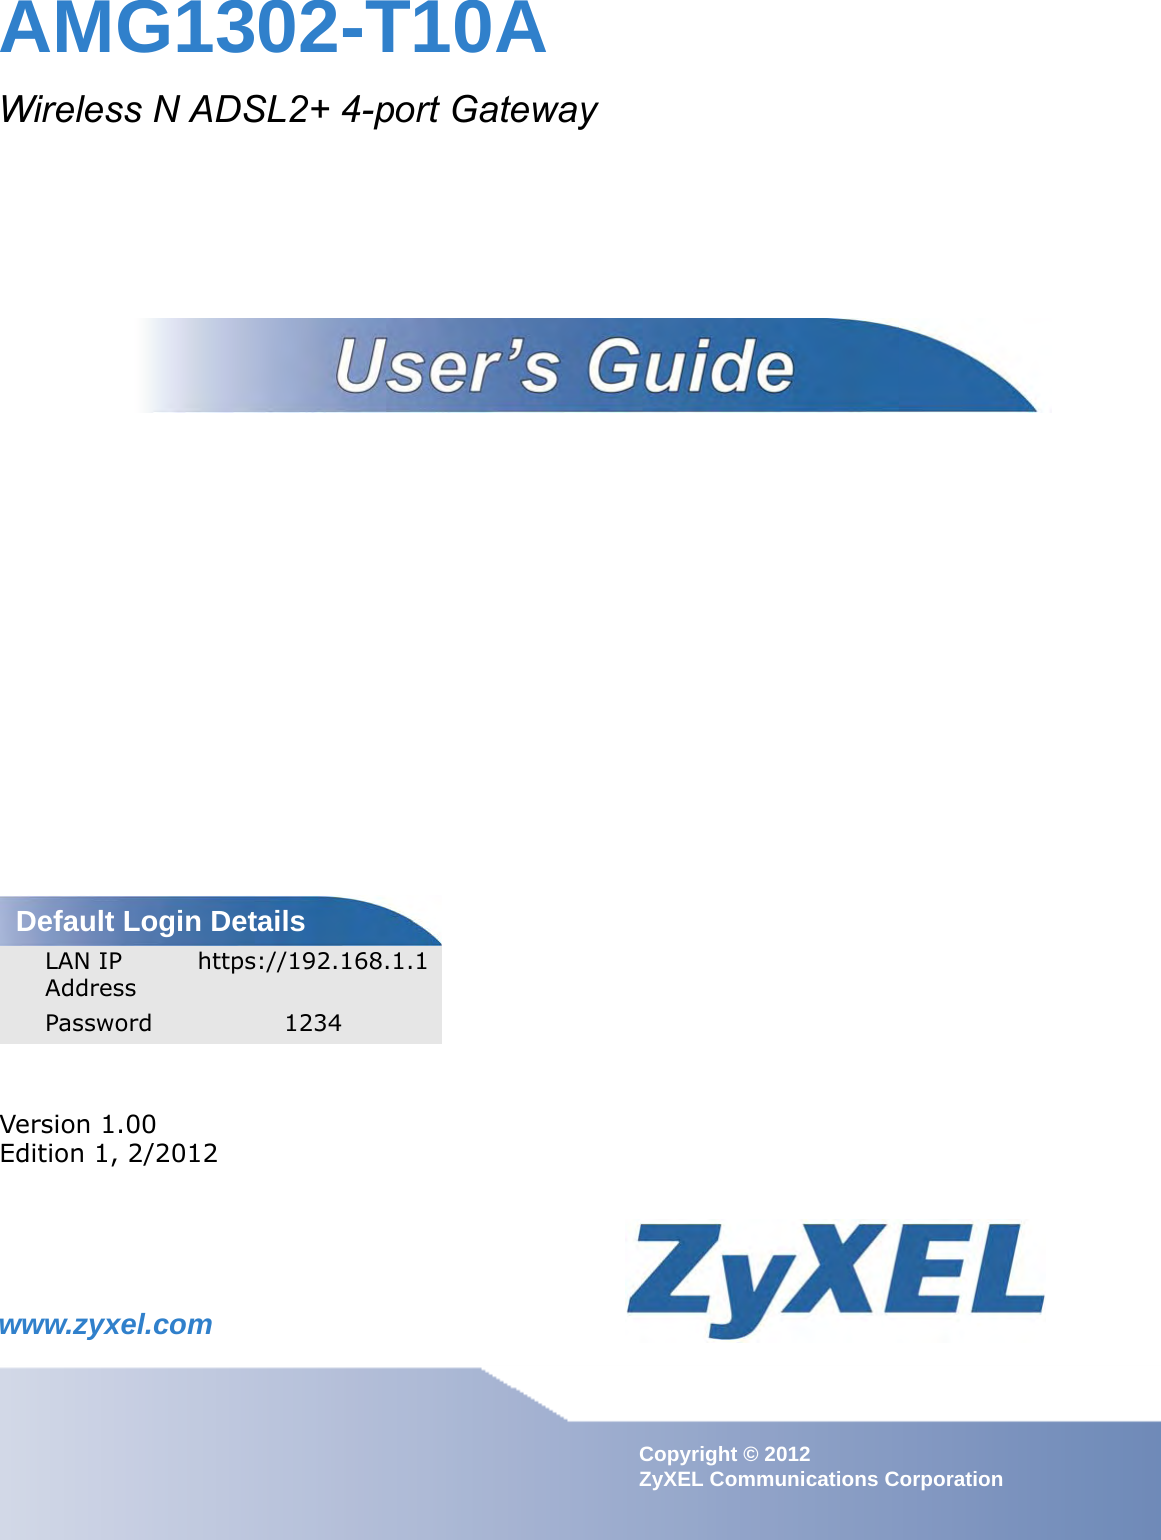 www.zyxel.comwww.zyxel.comAMG1302-T10AWireless N ADSL2+ 4-port GatewayIMPORTANT!READ CAREFULLY BEFORE USE.KEEP THIS GUIDE FOR FUTURE REFERENCE.Copyright © 2012ZyXEL Communications CorporationVersion 1.00Edition 1, 2/2012Default Login DetailsLAN IP Addresshttps://192.168.1.1Password 1234